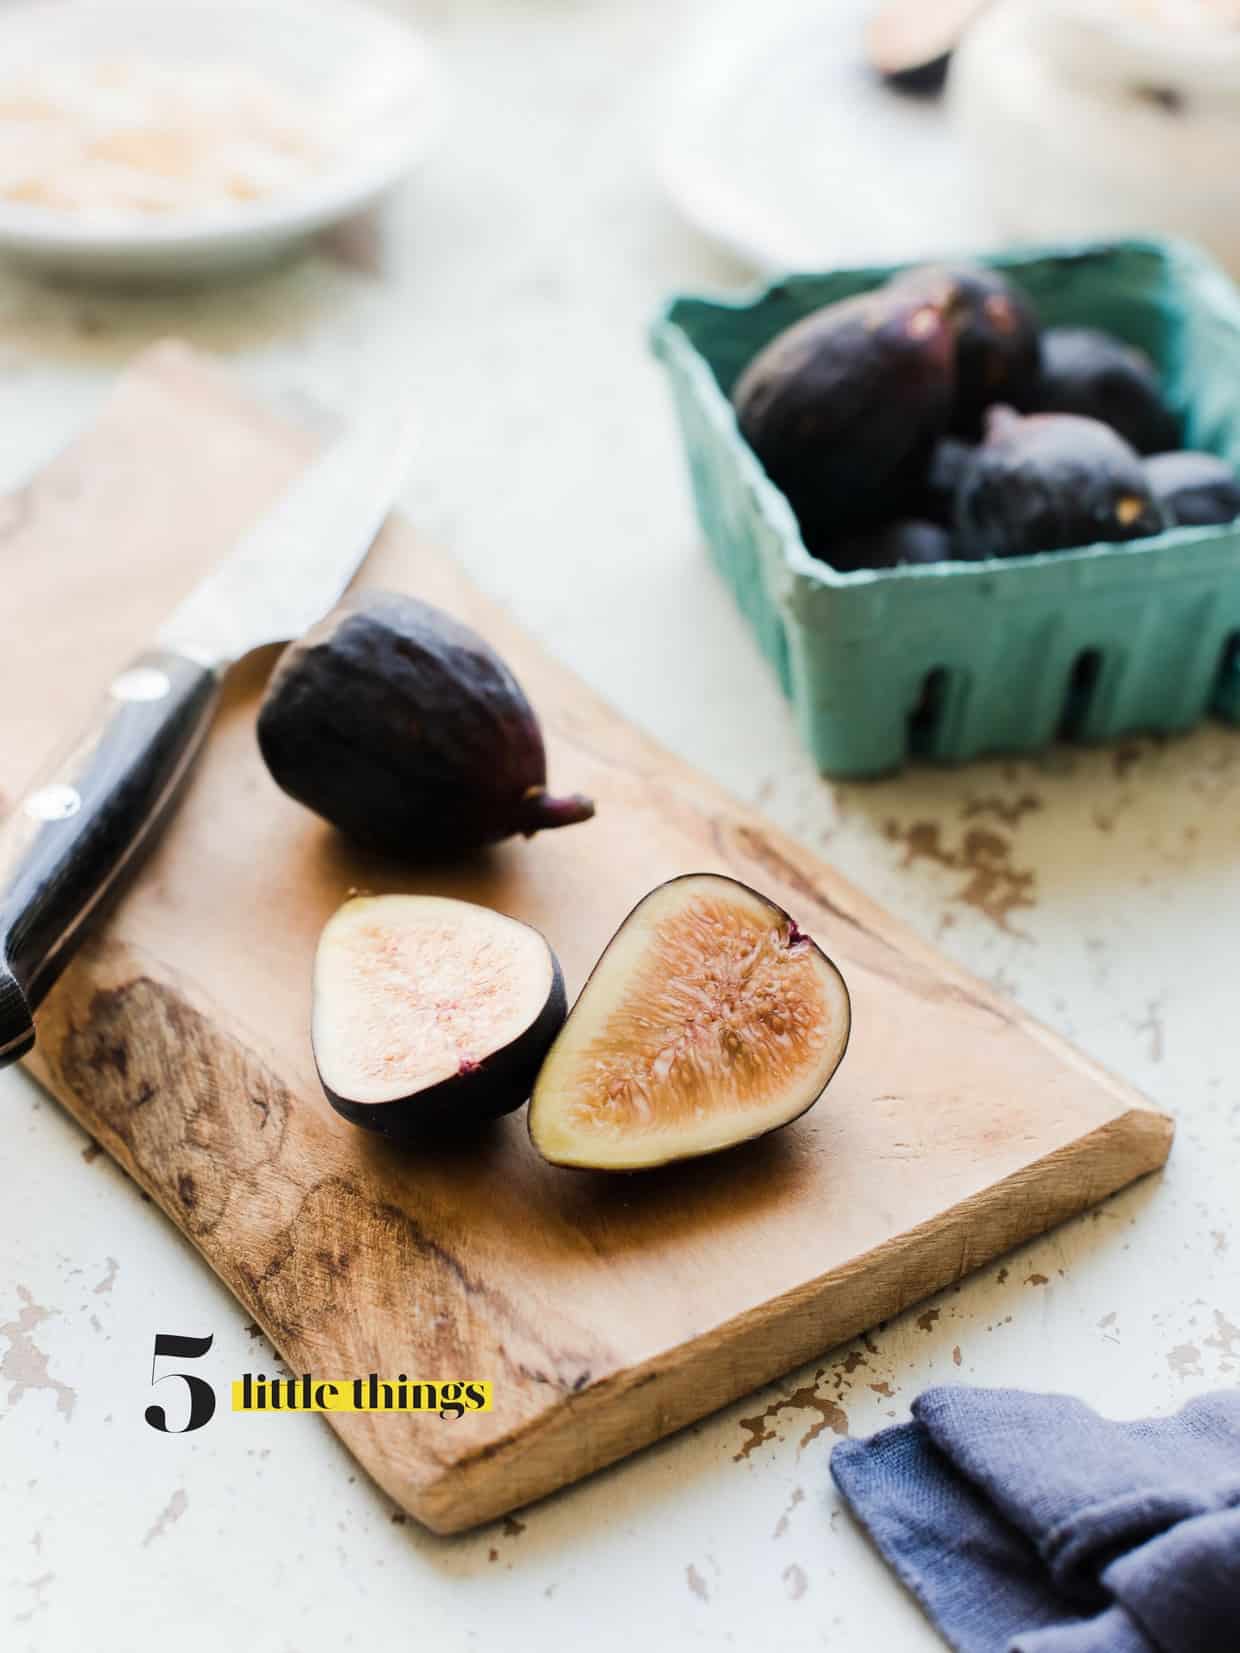 Figs are one the Five Little Things I loved the week of September 1, 2017.